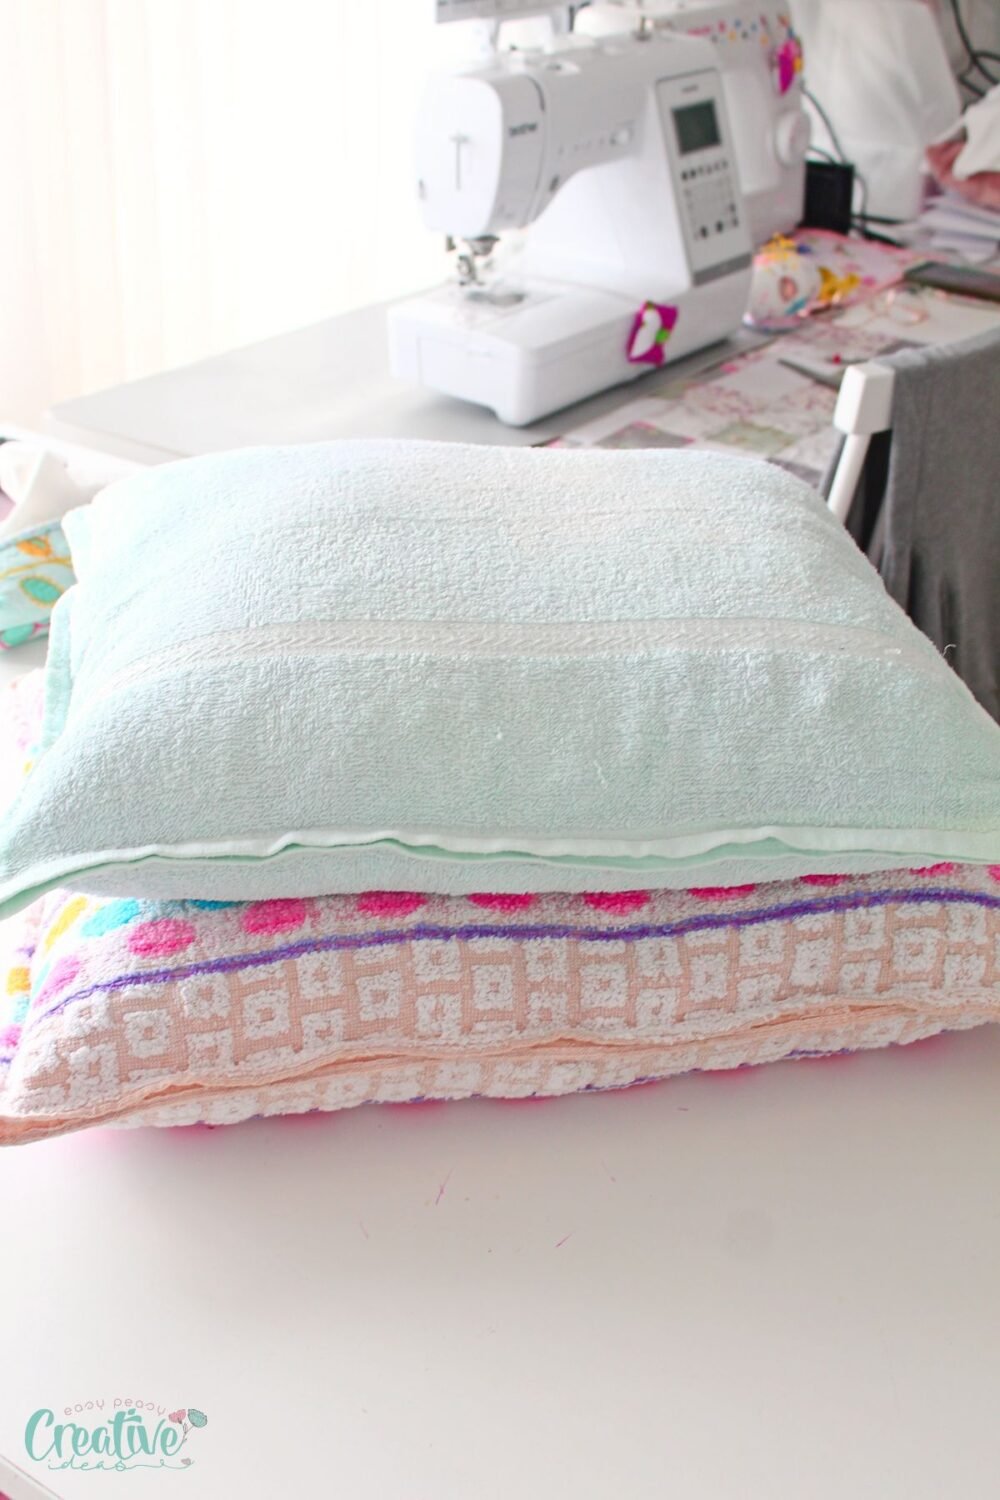 Make a unique cat bed DIY that matches your home's aesthetic by sewing a comfortable towel into a personalized space within just 10 minutes.